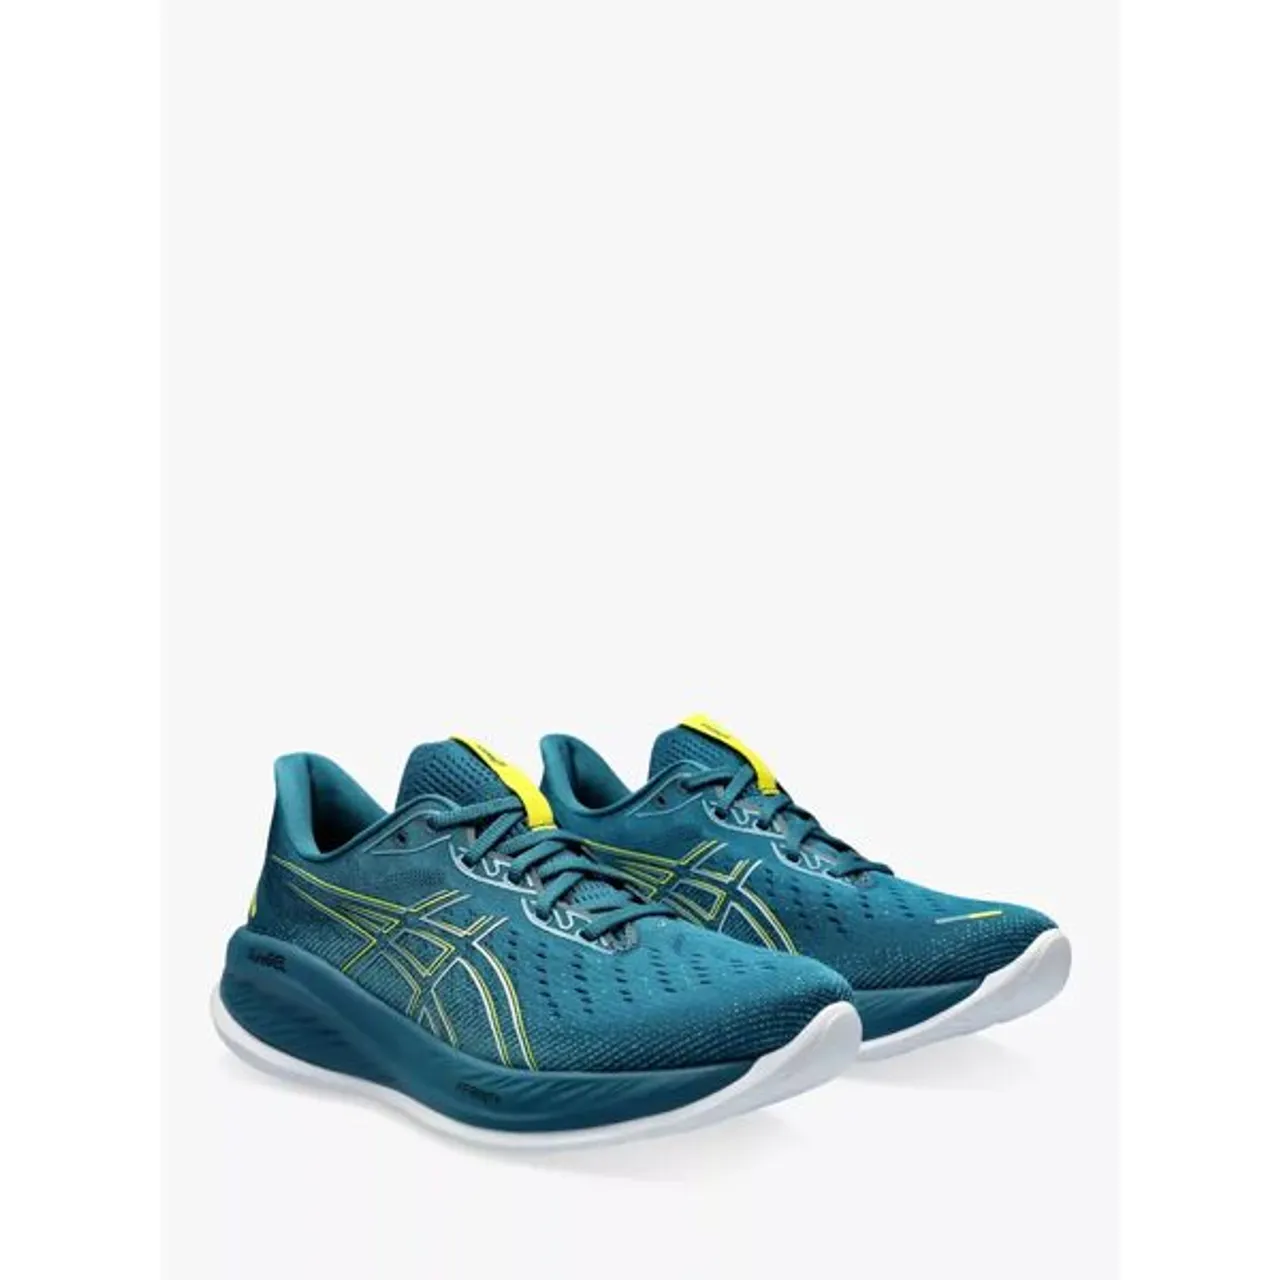 ASICS GEL-CUMULUS 26 Men's Running Shoes - Teal/Bright Yellow - Male